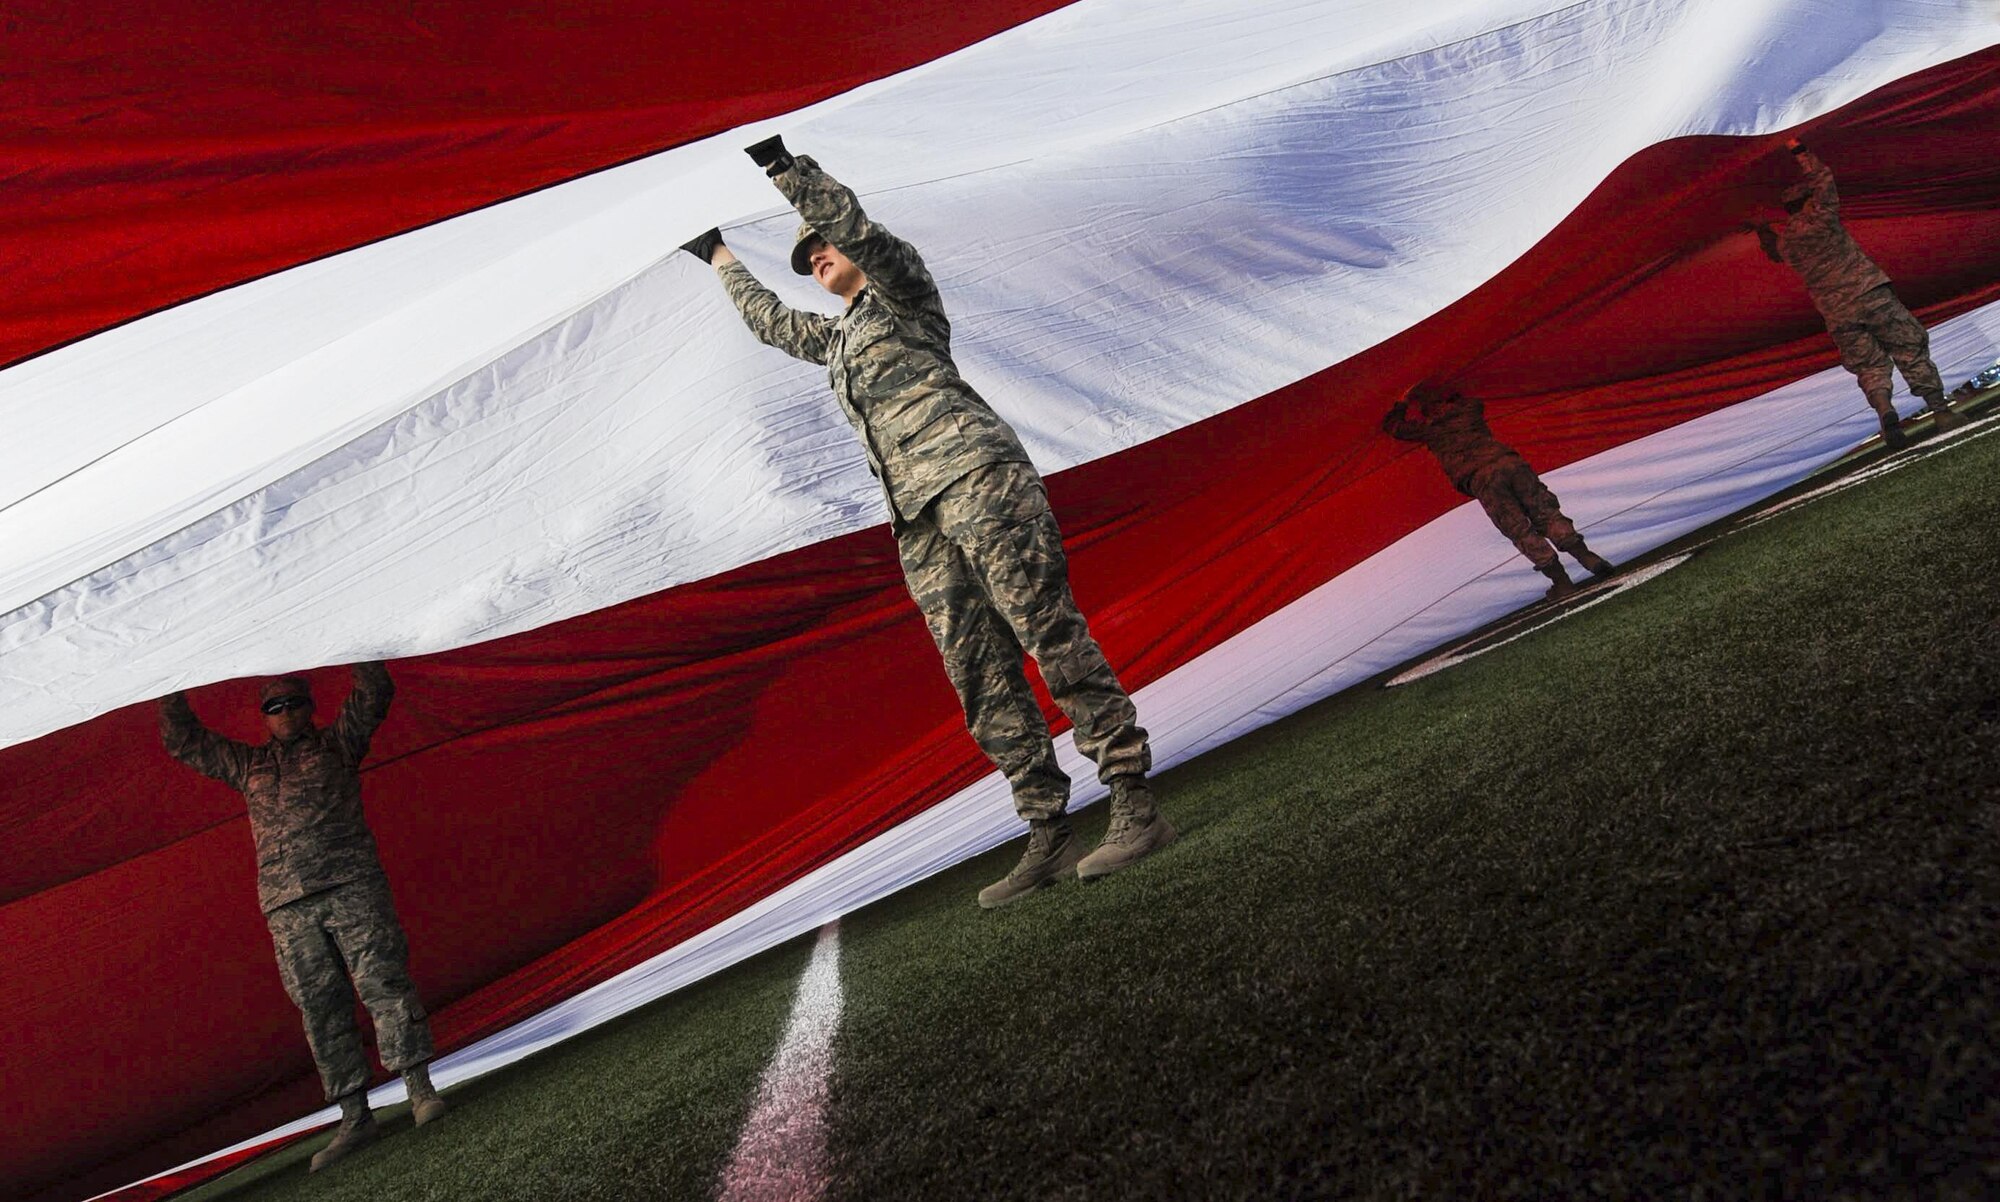 Airmen from Nellis and Creech Air Force Bases hold up the American flag at Sam Boyd Stadium before the Las Vegas Bowl, Dec. 17, 2016. The Airmen who held the flag were afforded the opportunity to stay and watch the game between the Houston Cougars and San Diego State Aztecs. (U.S. Air Force photo by Airman 1st Class Kevin Tanenbaum/Released)